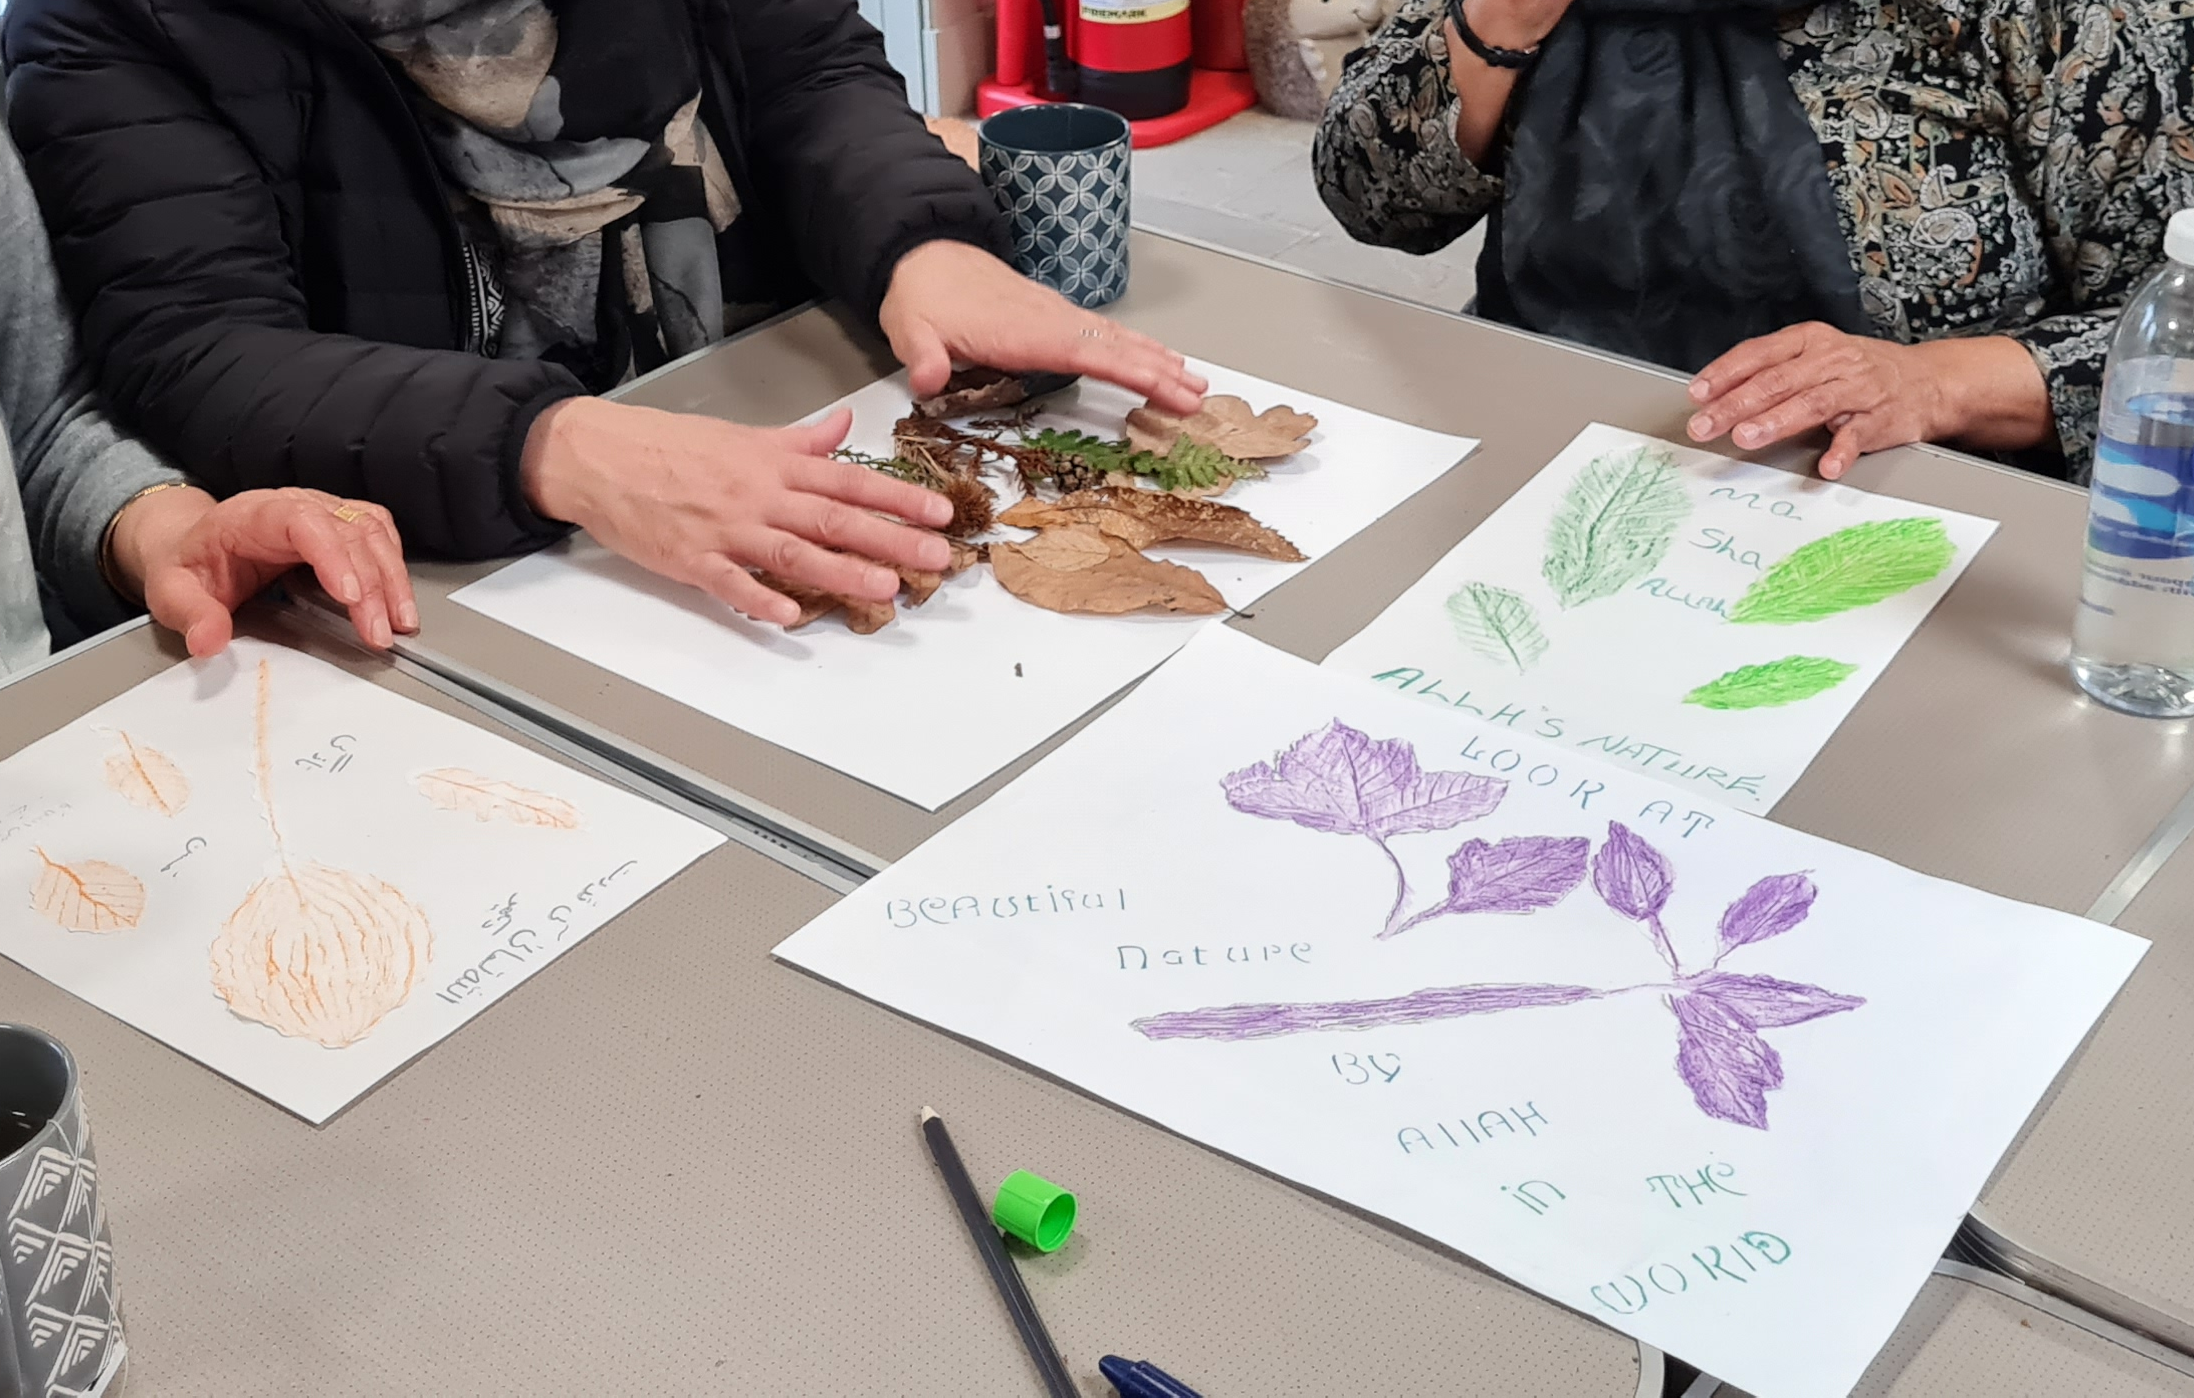 Pieces of paper are laid on a table, each with drawings of leaves surrounded by words. A collection of real leaves and twigs are laid out next to these and three people sit around the table: their hands can be seen working over the paper.